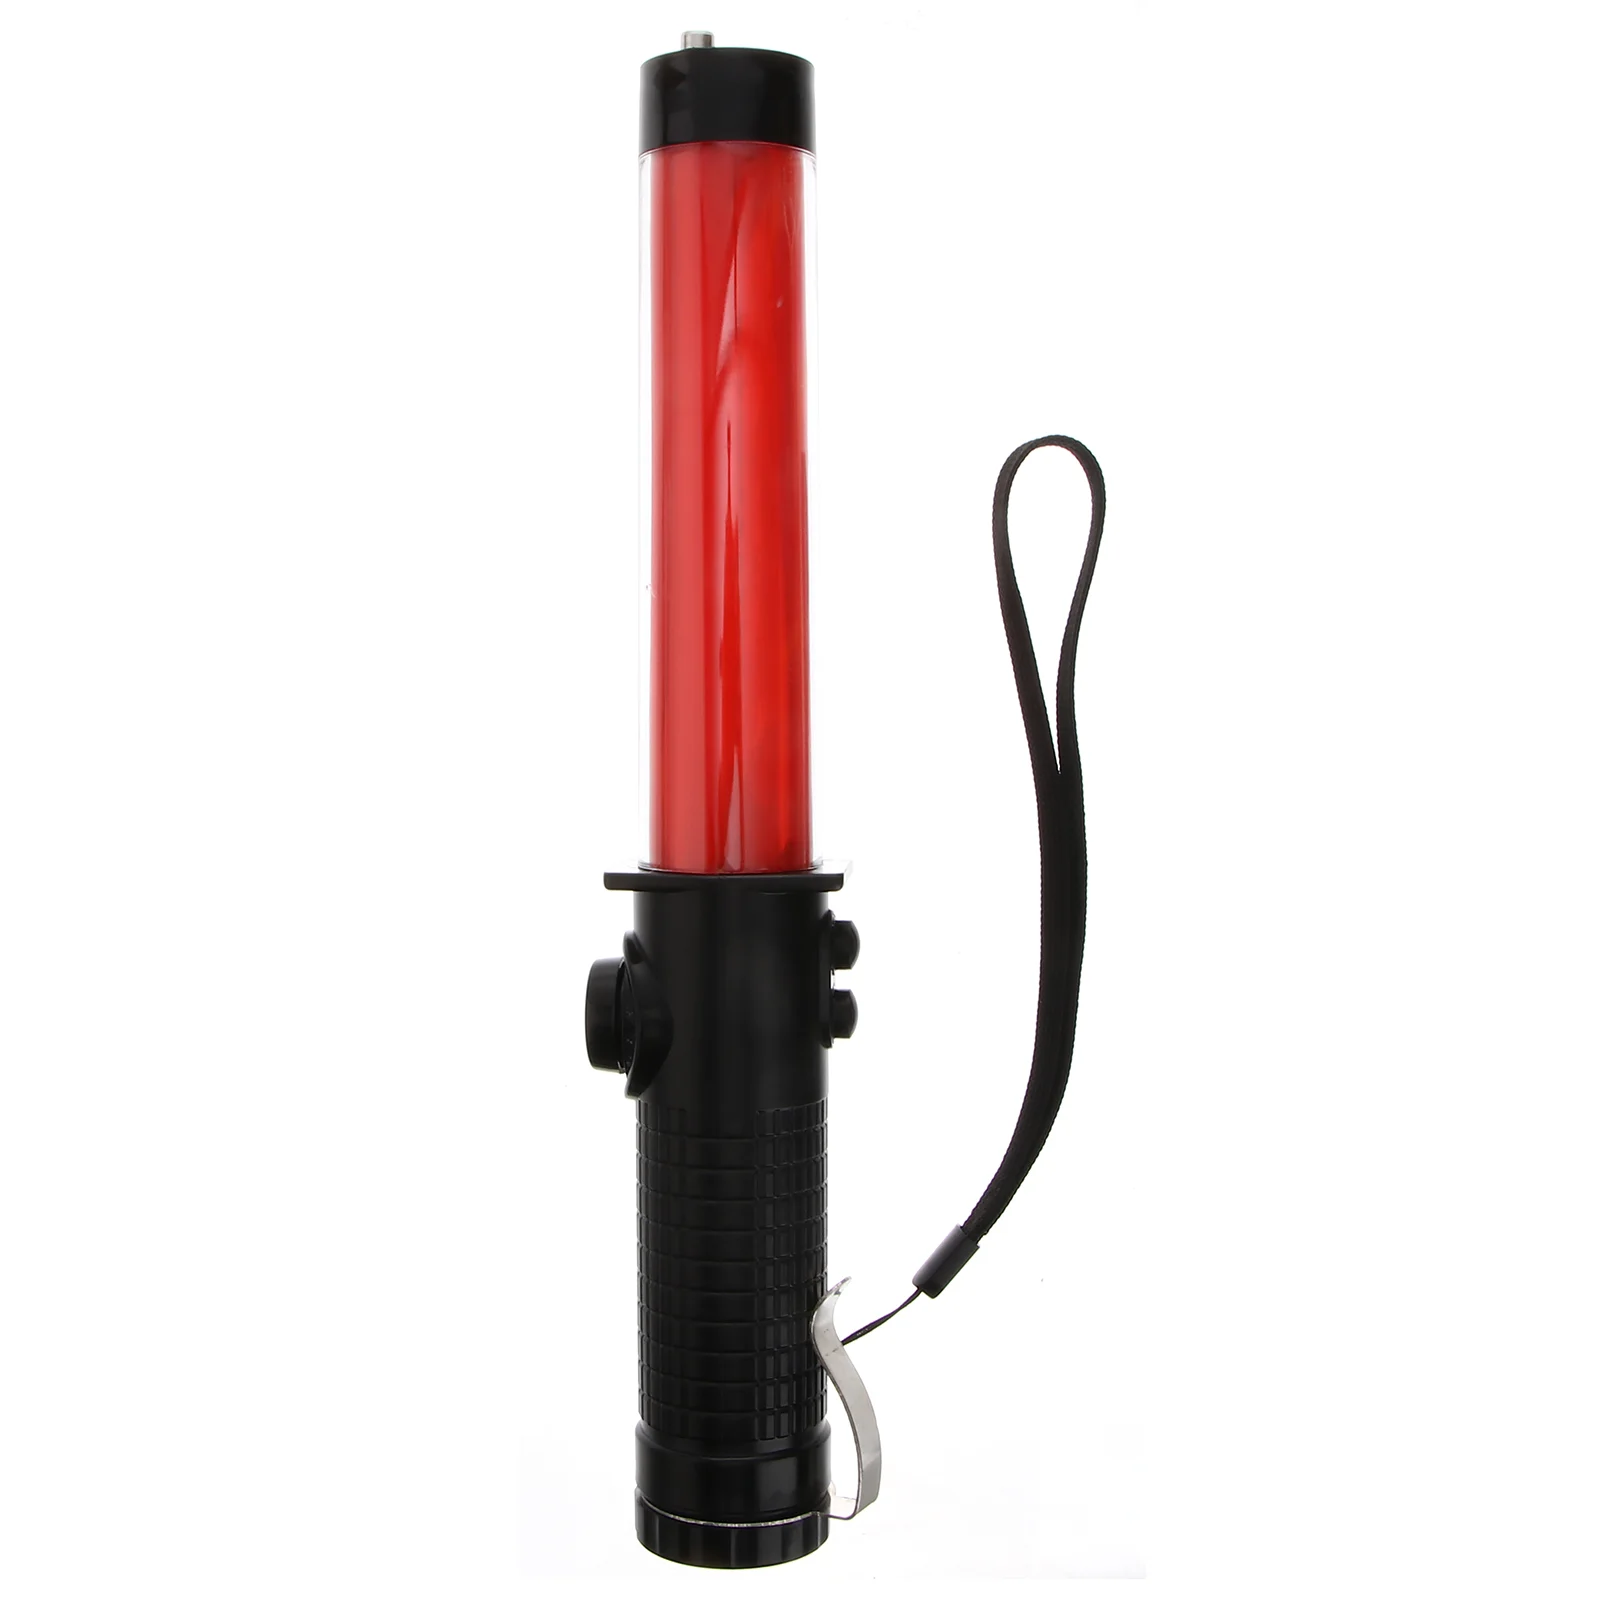 

Traffic Wand, Led Light Traffic Control Wand, Safety Traffic Light for Parking Guides Outdoor Camping with Wrist Strap Warning